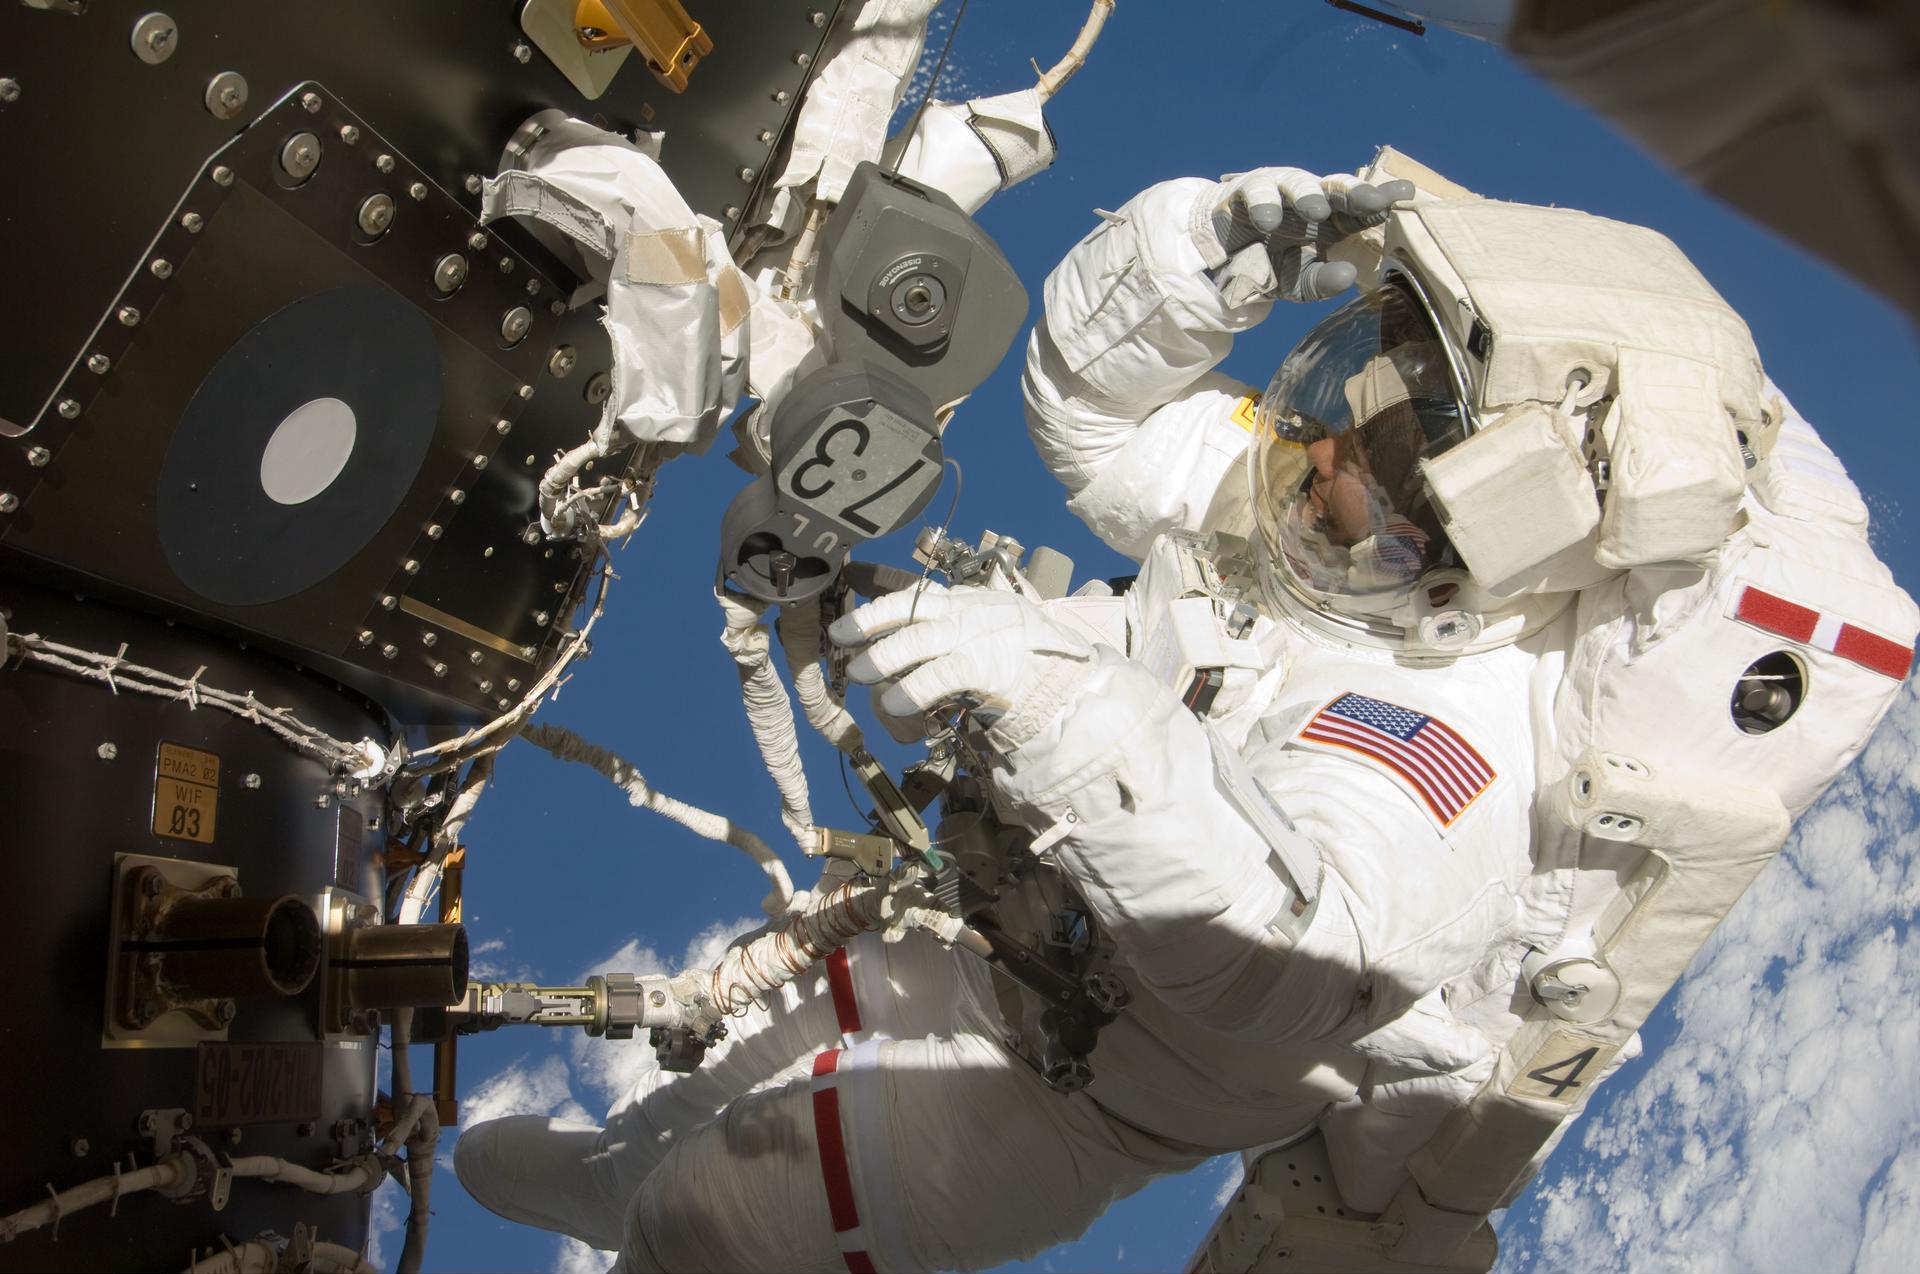 Astronaut Tom Marshburn, STS-127 mission specialist, participates in his first spacewalk and the second overall for the crew members of the Space Shuttle Endeavour and the International Space Station July 20, 2009.